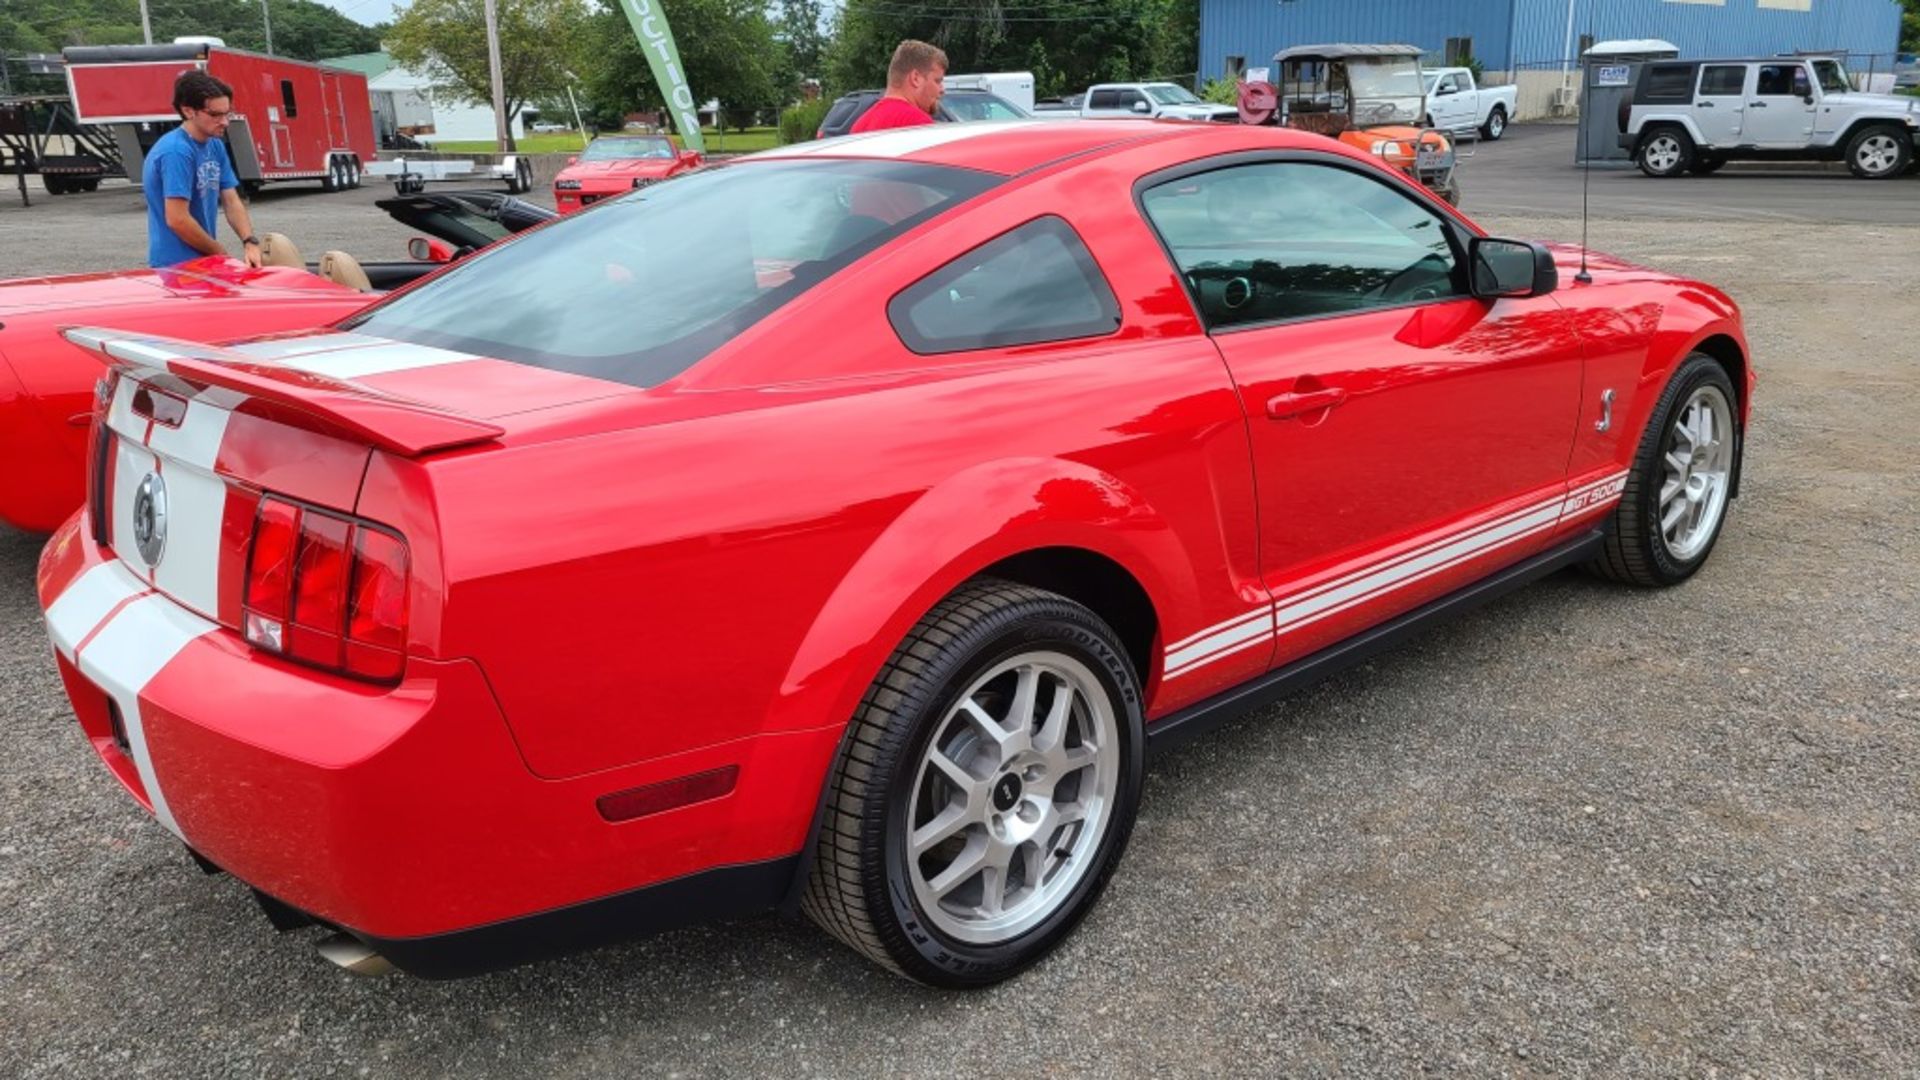 2007 Ford Mustang Shelby Gt500 - Image 6 of 13